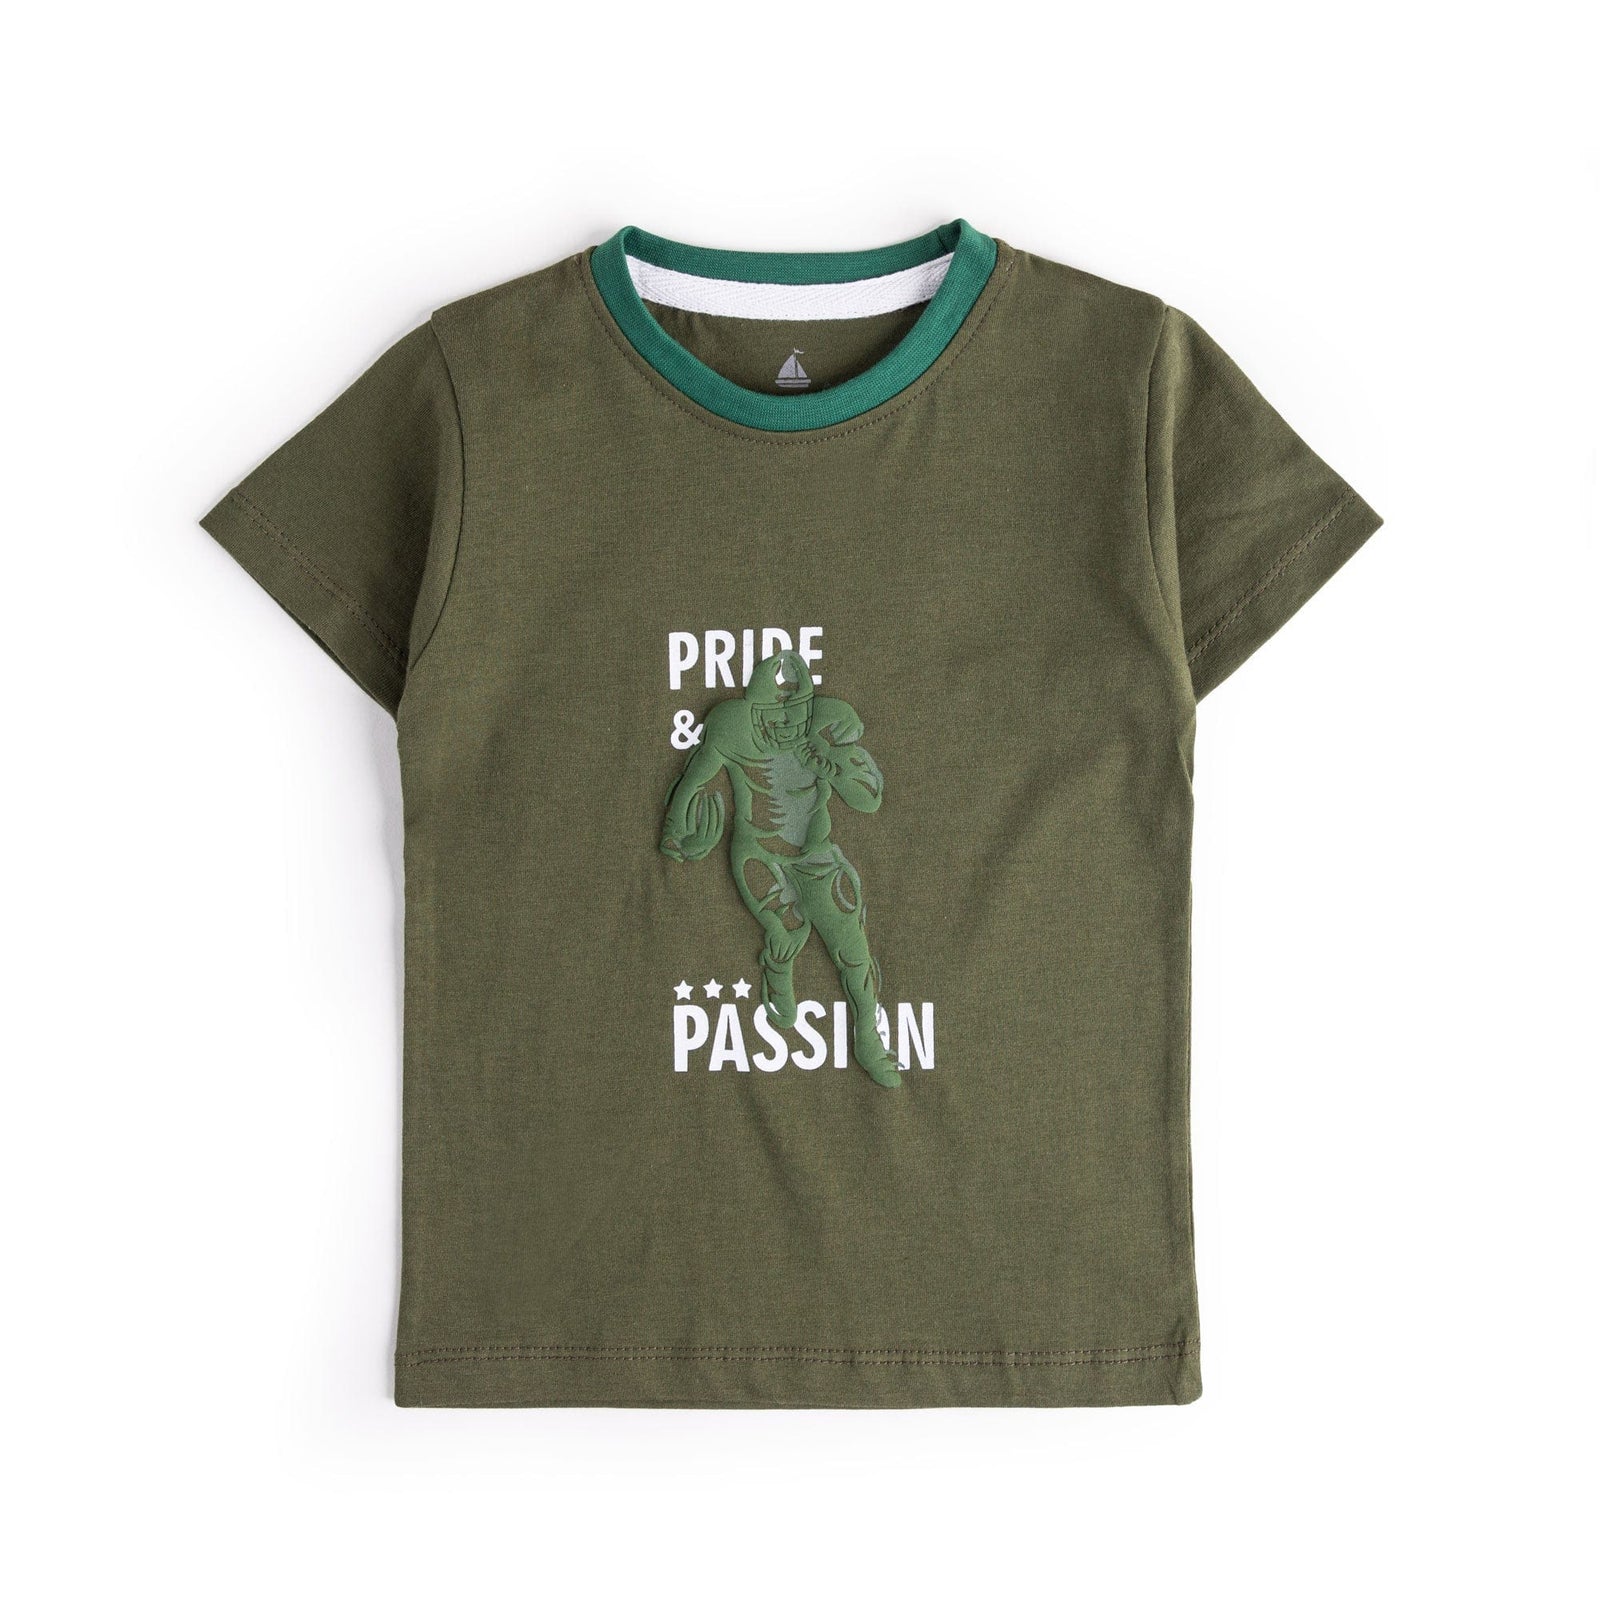 Stone Harbor Boy's Tee Shirt Olive / 0-3 M BOY'S COOL PRIDE AND PASSION T-SHIRT